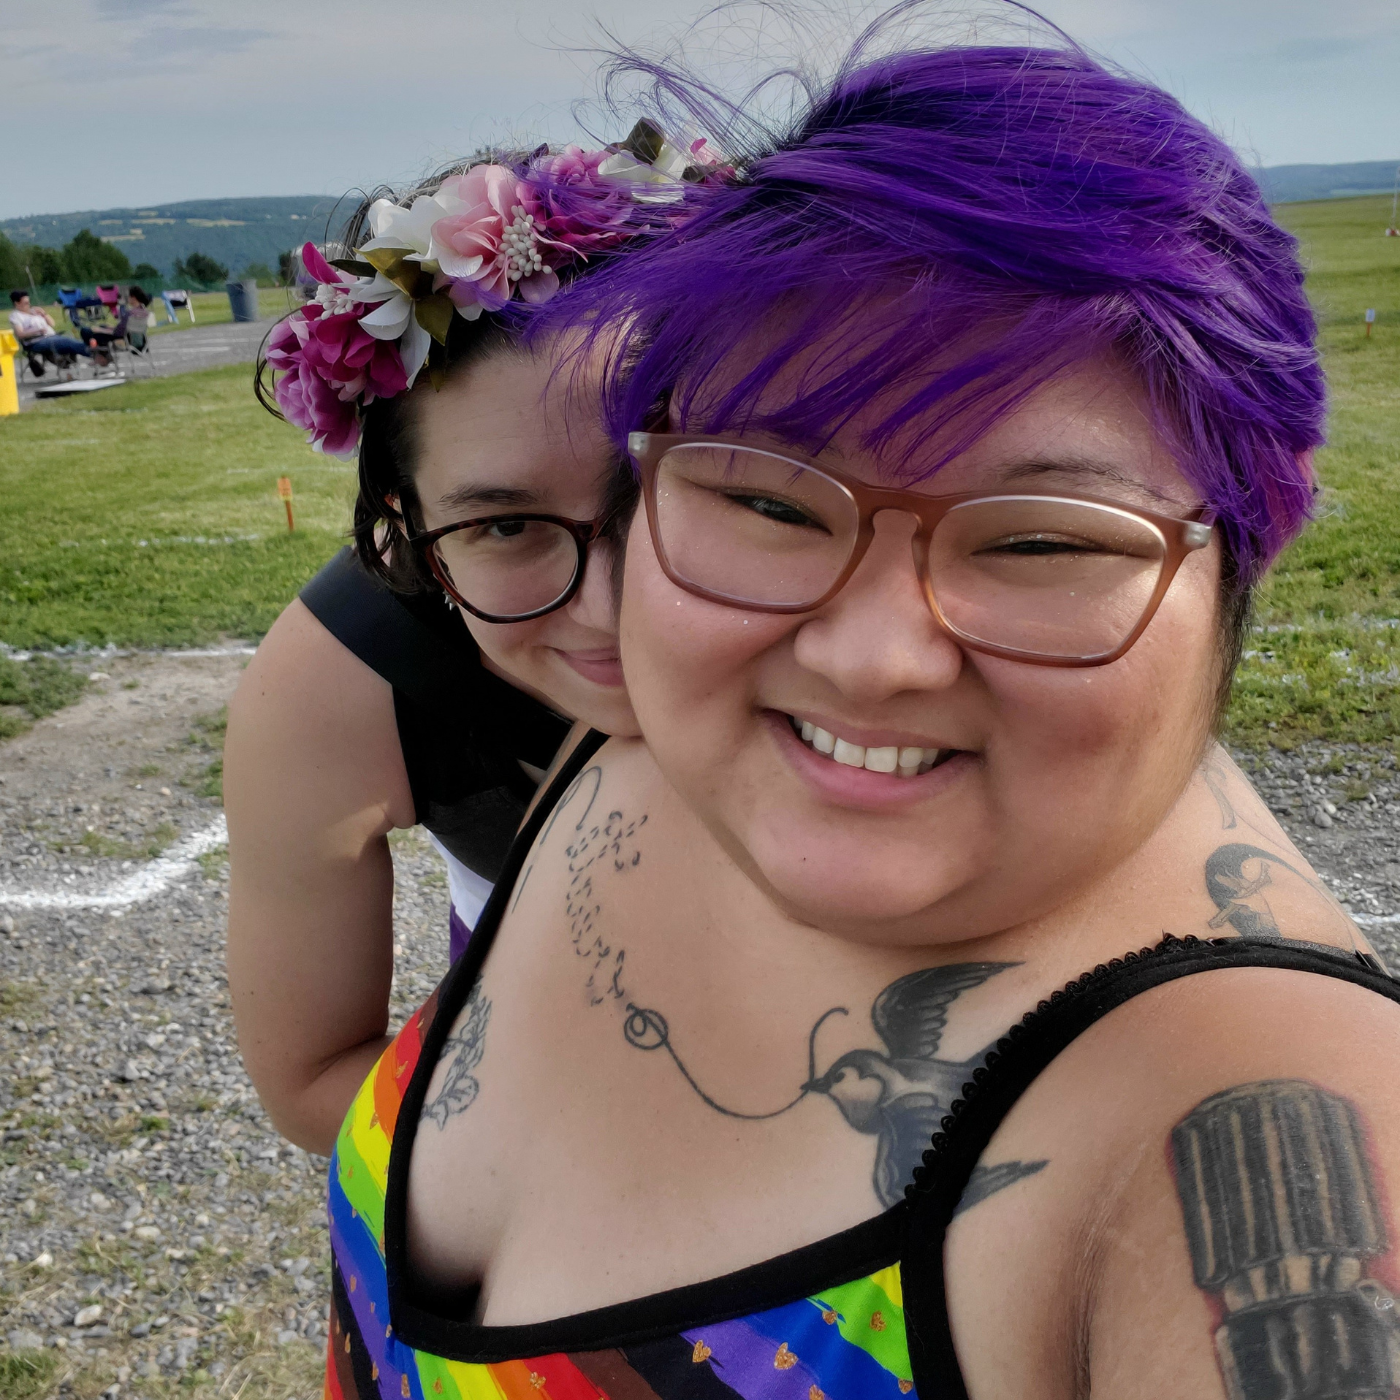 Teukie and their partner Sky look at the camera and smile. Teukie wears a tank top with black straps and a rainbow striped design with small ditsy gold hearts. Sky is wearing a flower crown and a black tank top.